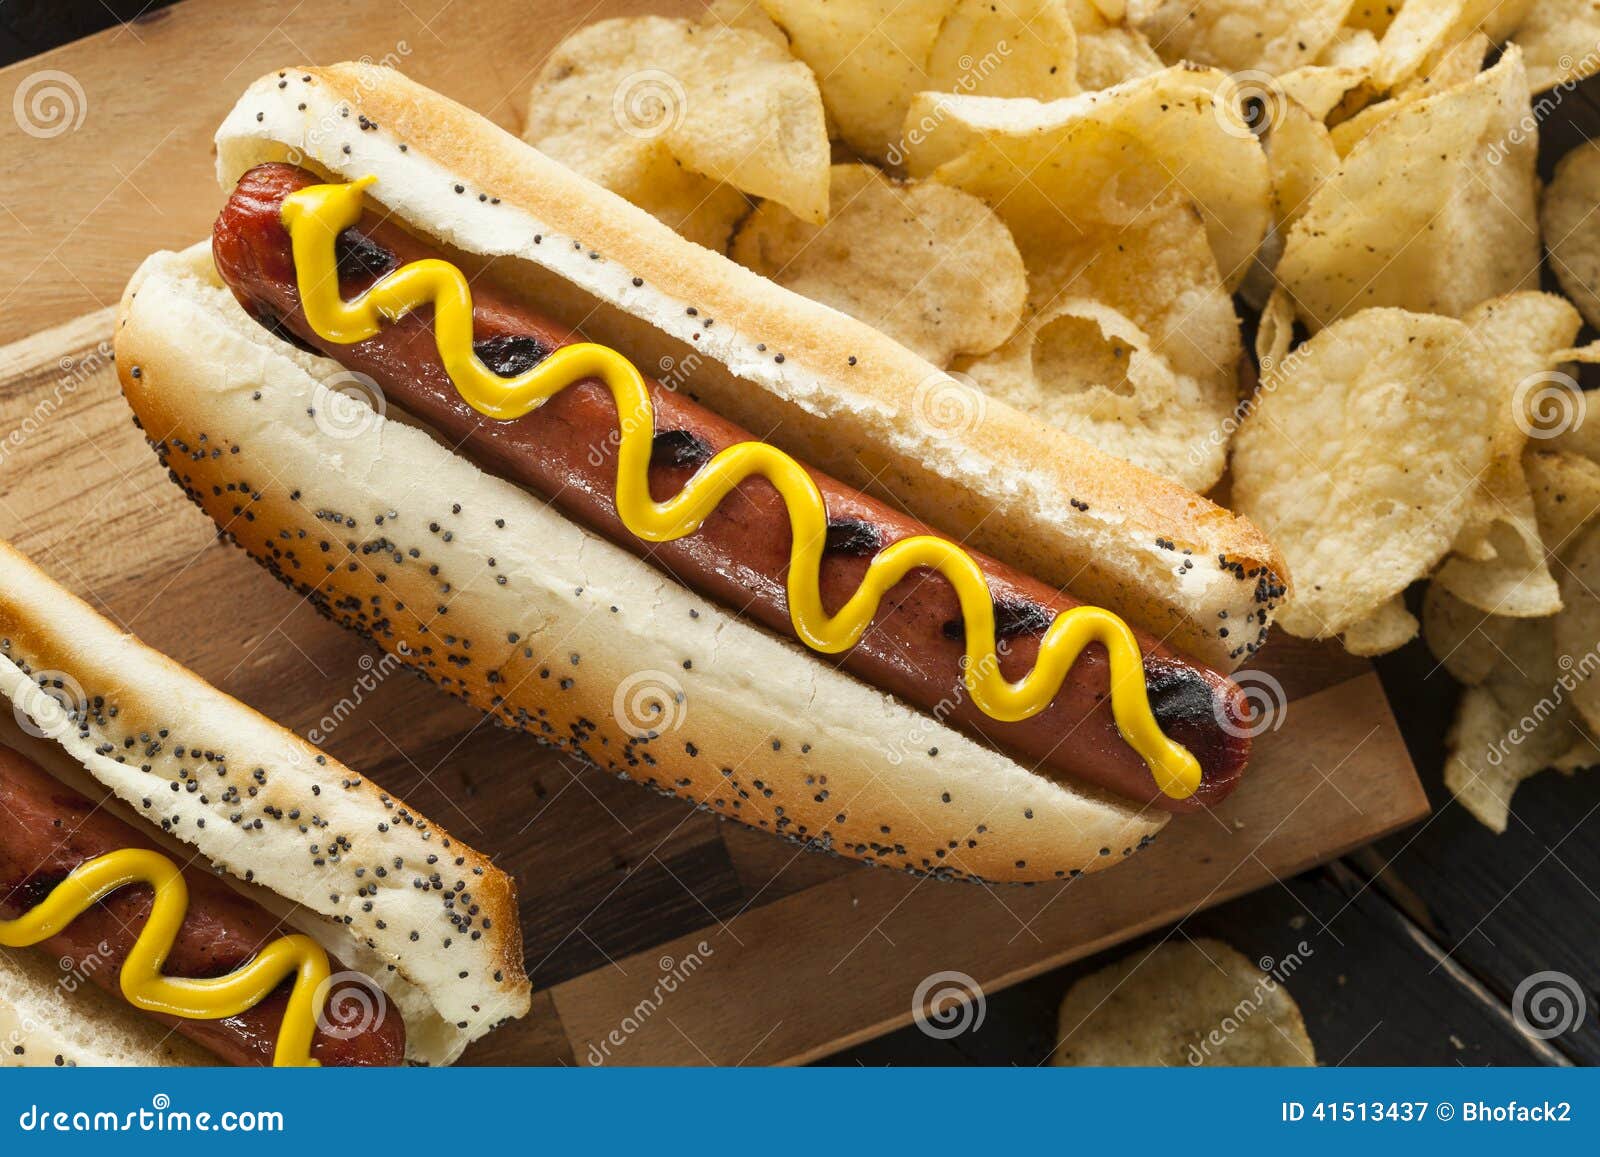 gourmet grilled all beef hots dogs